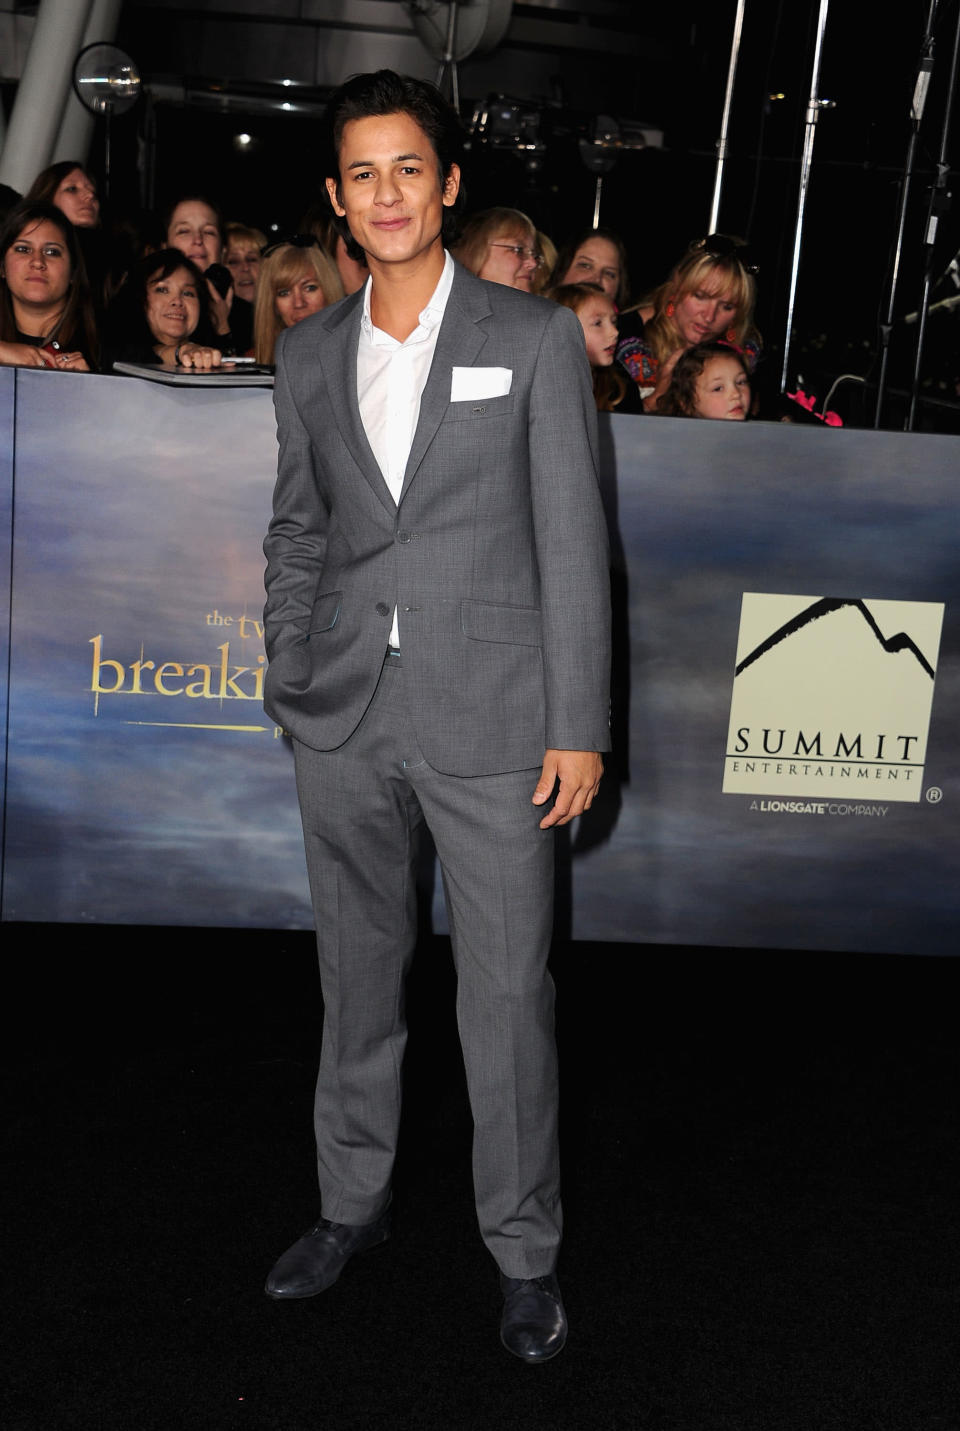 Bronson Pelletier arrives at "The Twilight Saga: Breaking Dawn - Part 2" Los Angeles premiere at Nokia Theatre L.A. Live on November 12, 2012 in Los Angeles, California. (Photo by Steve Granitz/WireImage)